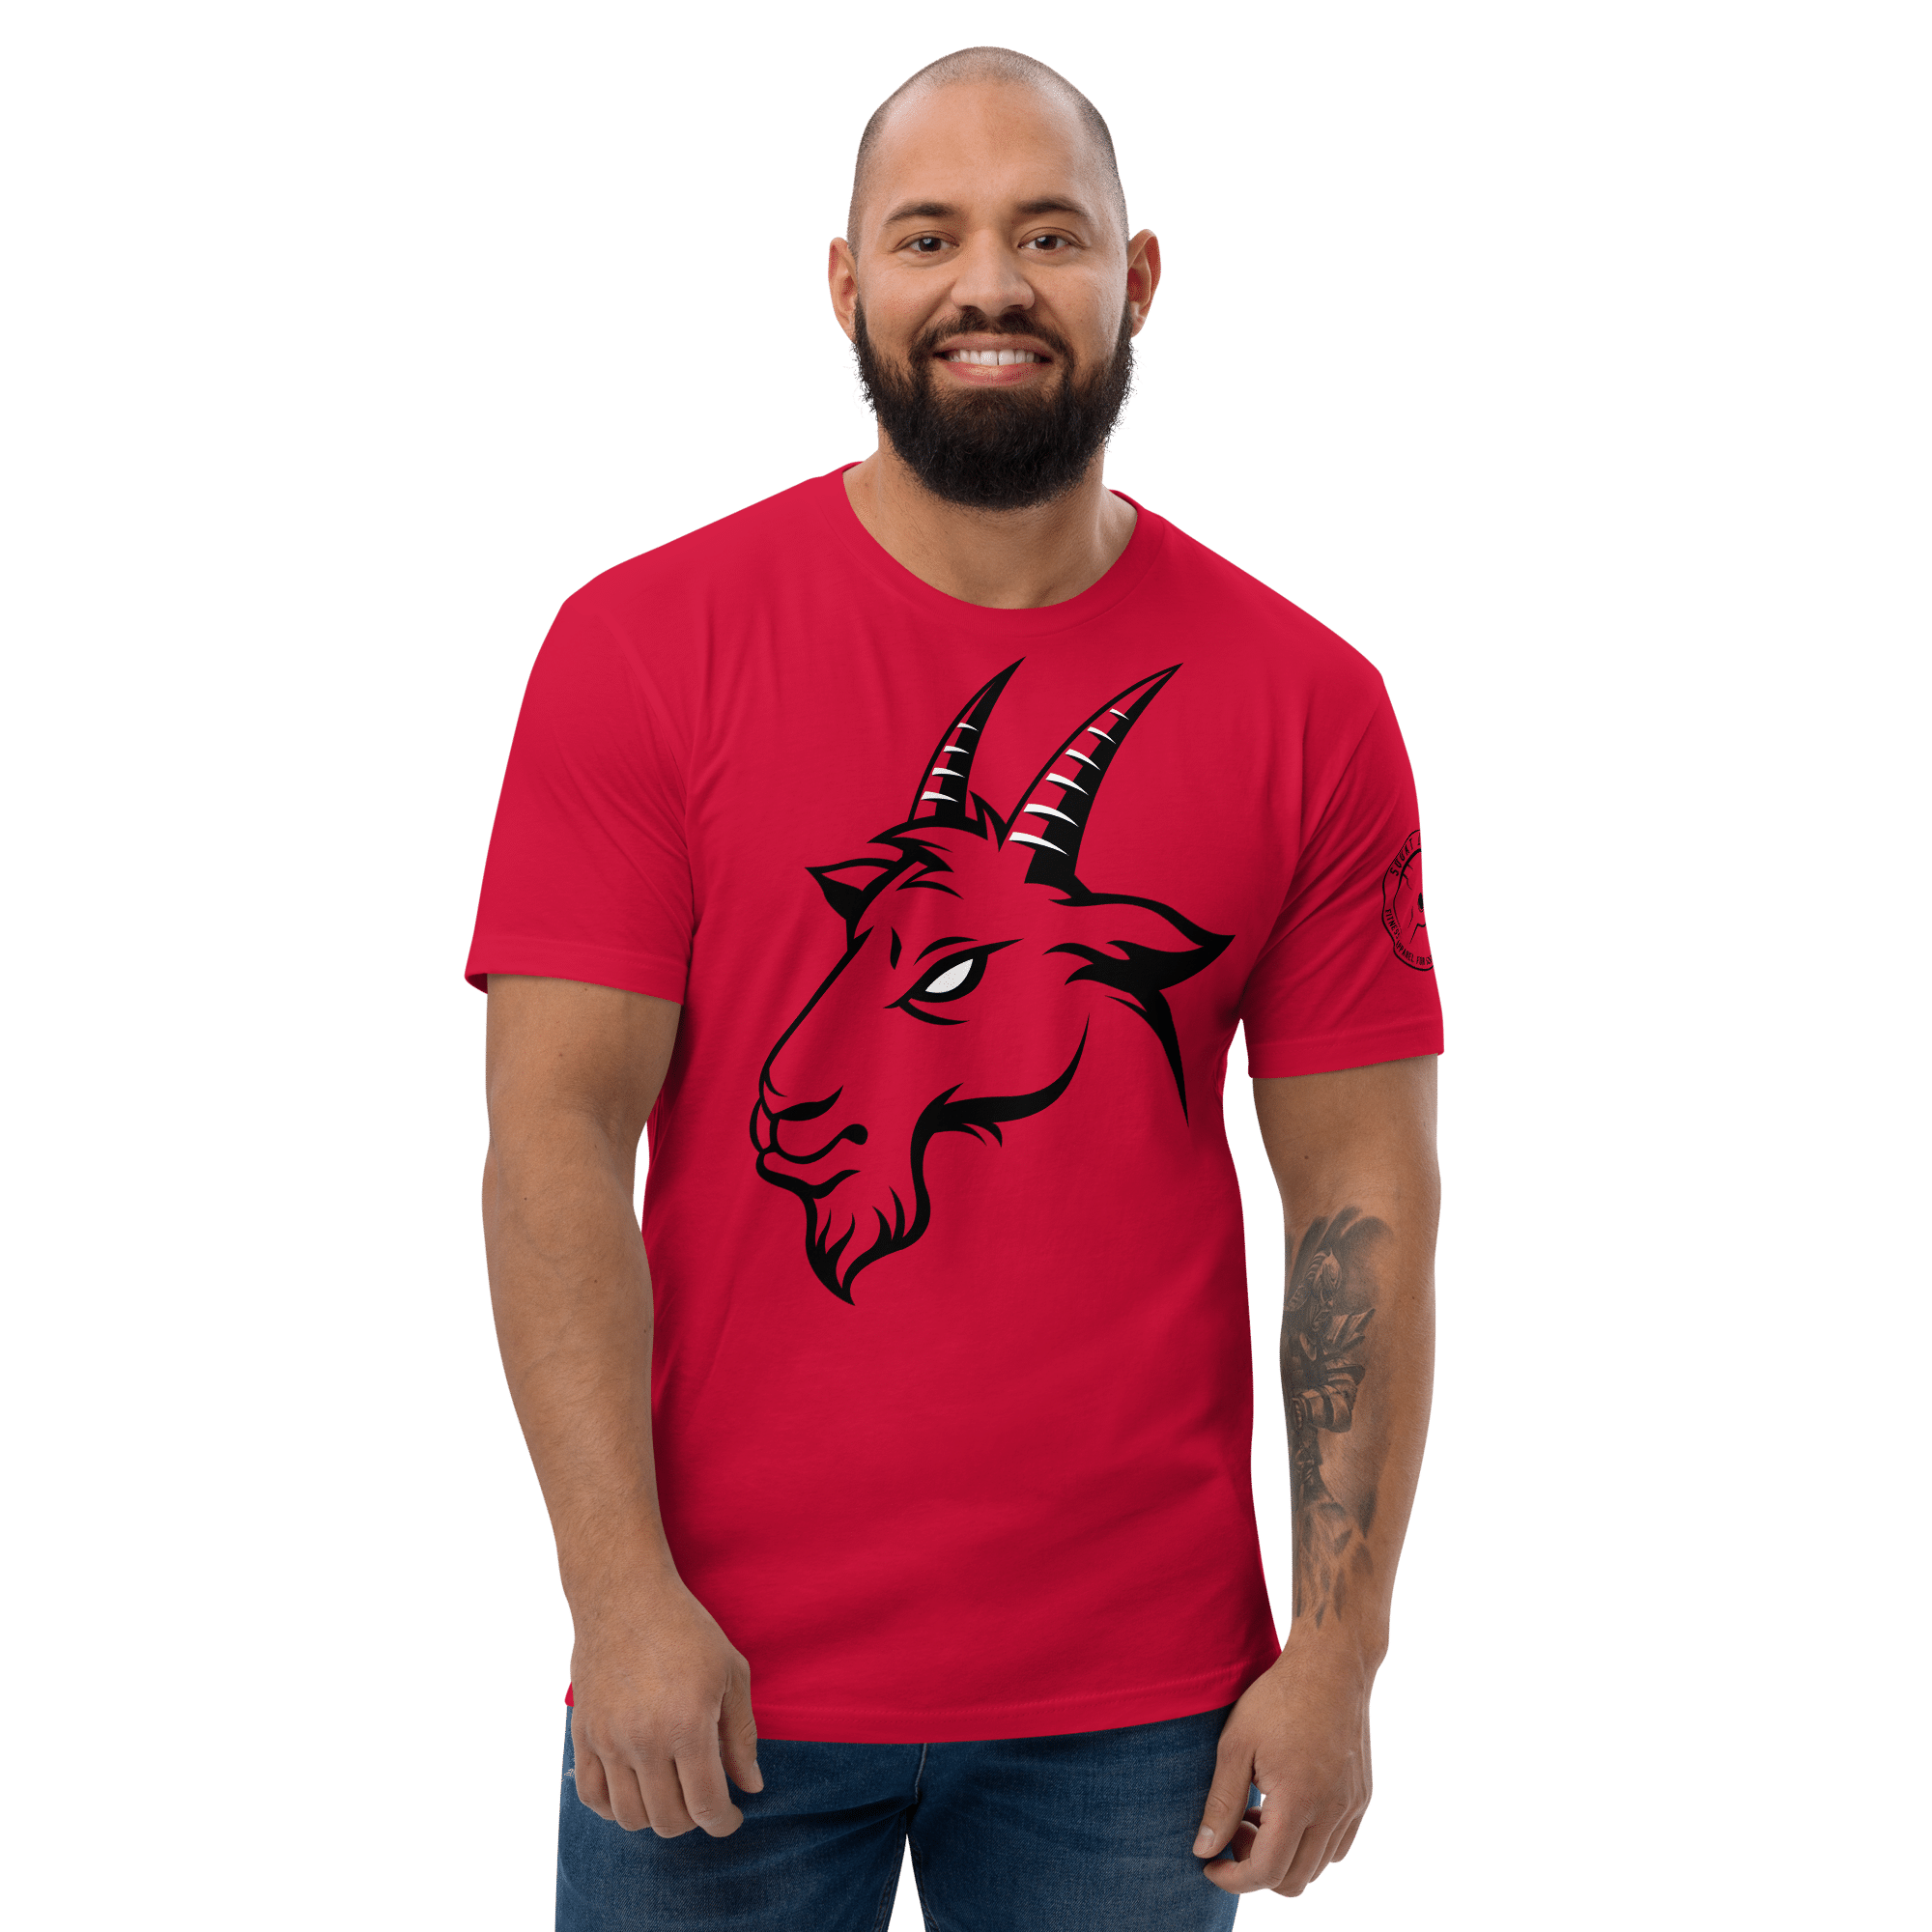 mens fitted t shirt red front 641f4f0b31284